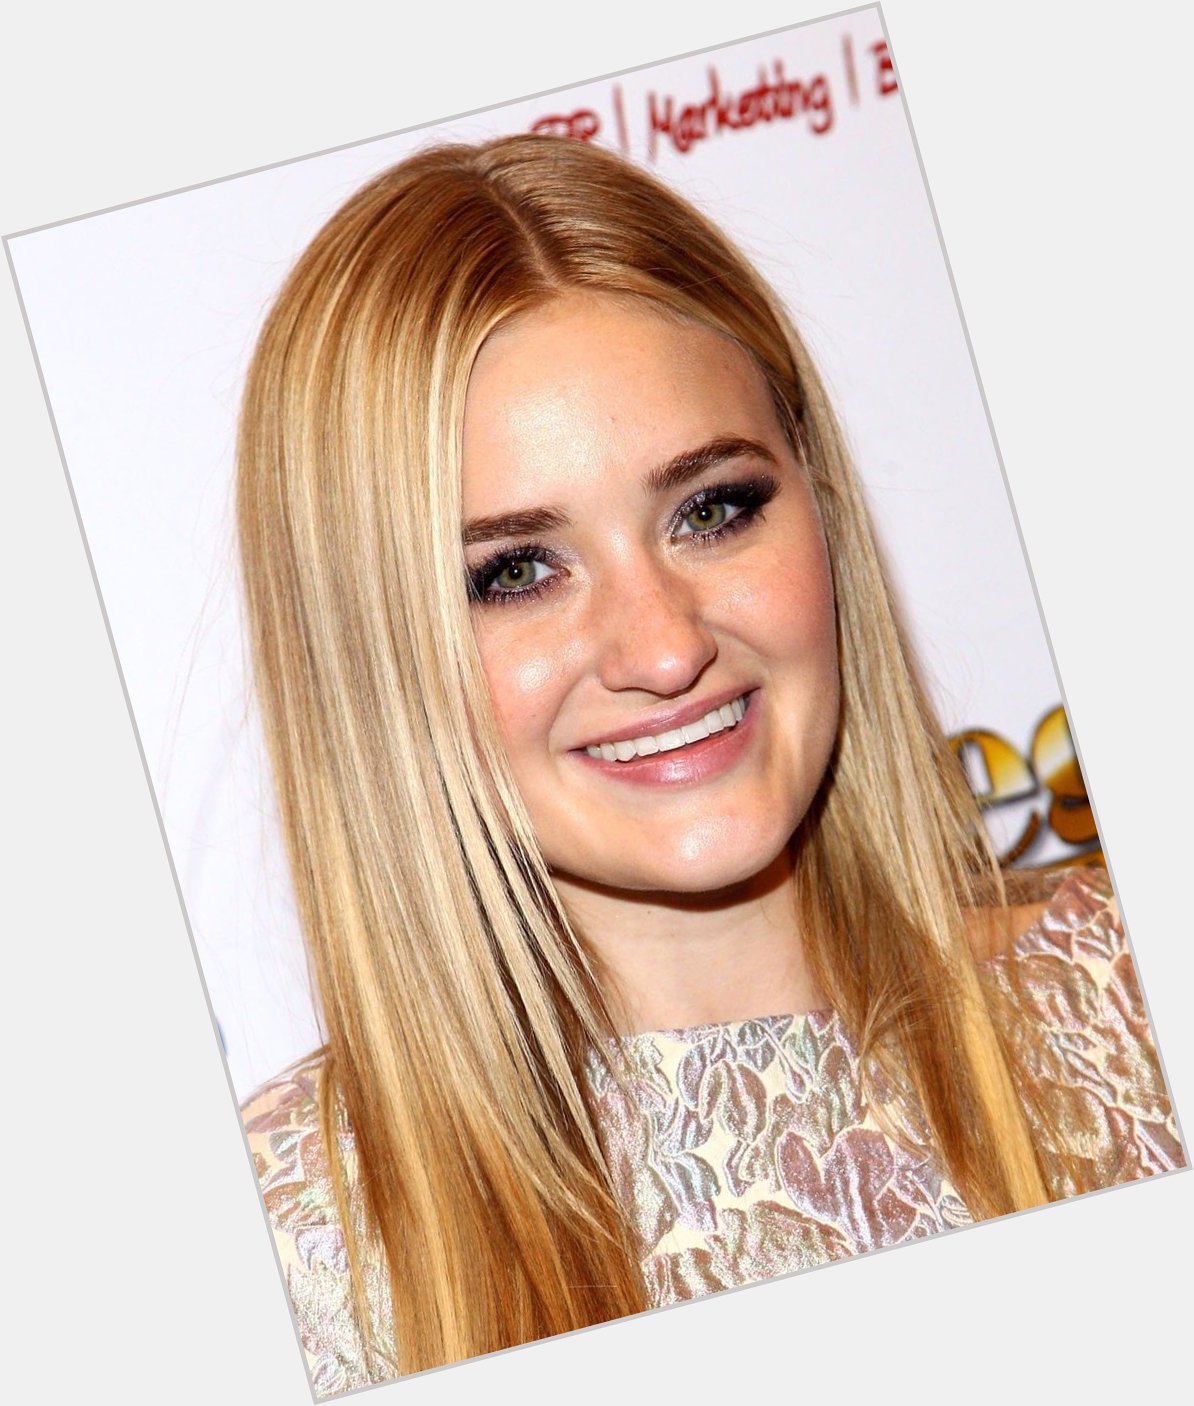 Happy 31st birthday to AJ Michalka! The actress who played Lainey Lewis from The Goldbergs and Schooled. 